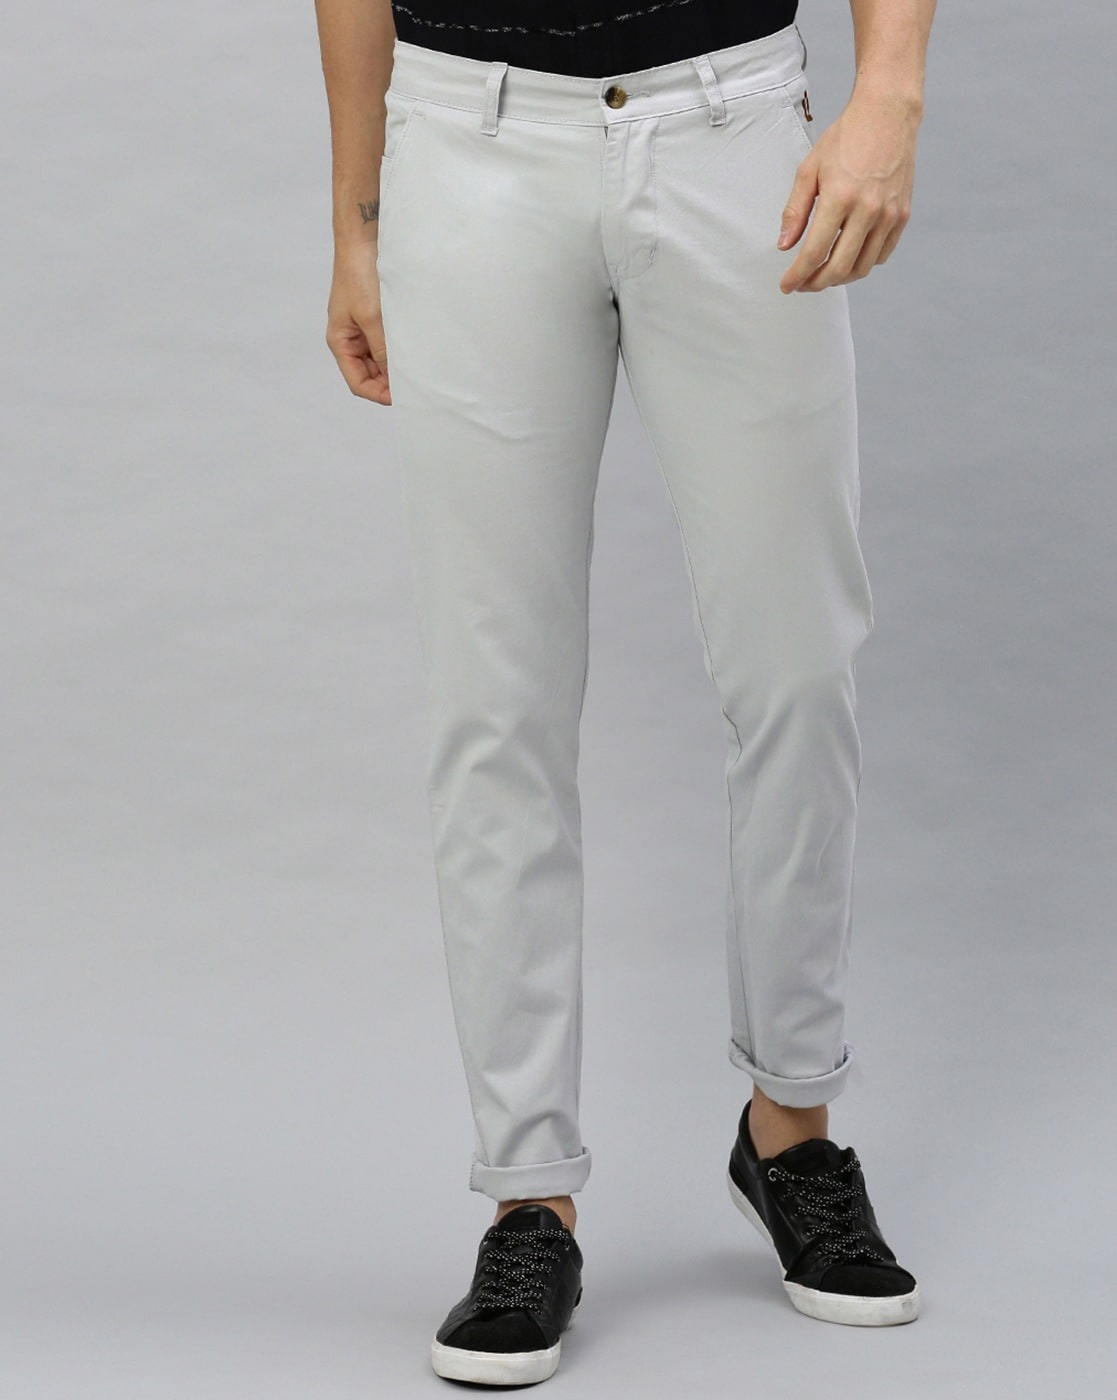 Grey Trousers  Buy Grey Trousers Online in India at Best Price